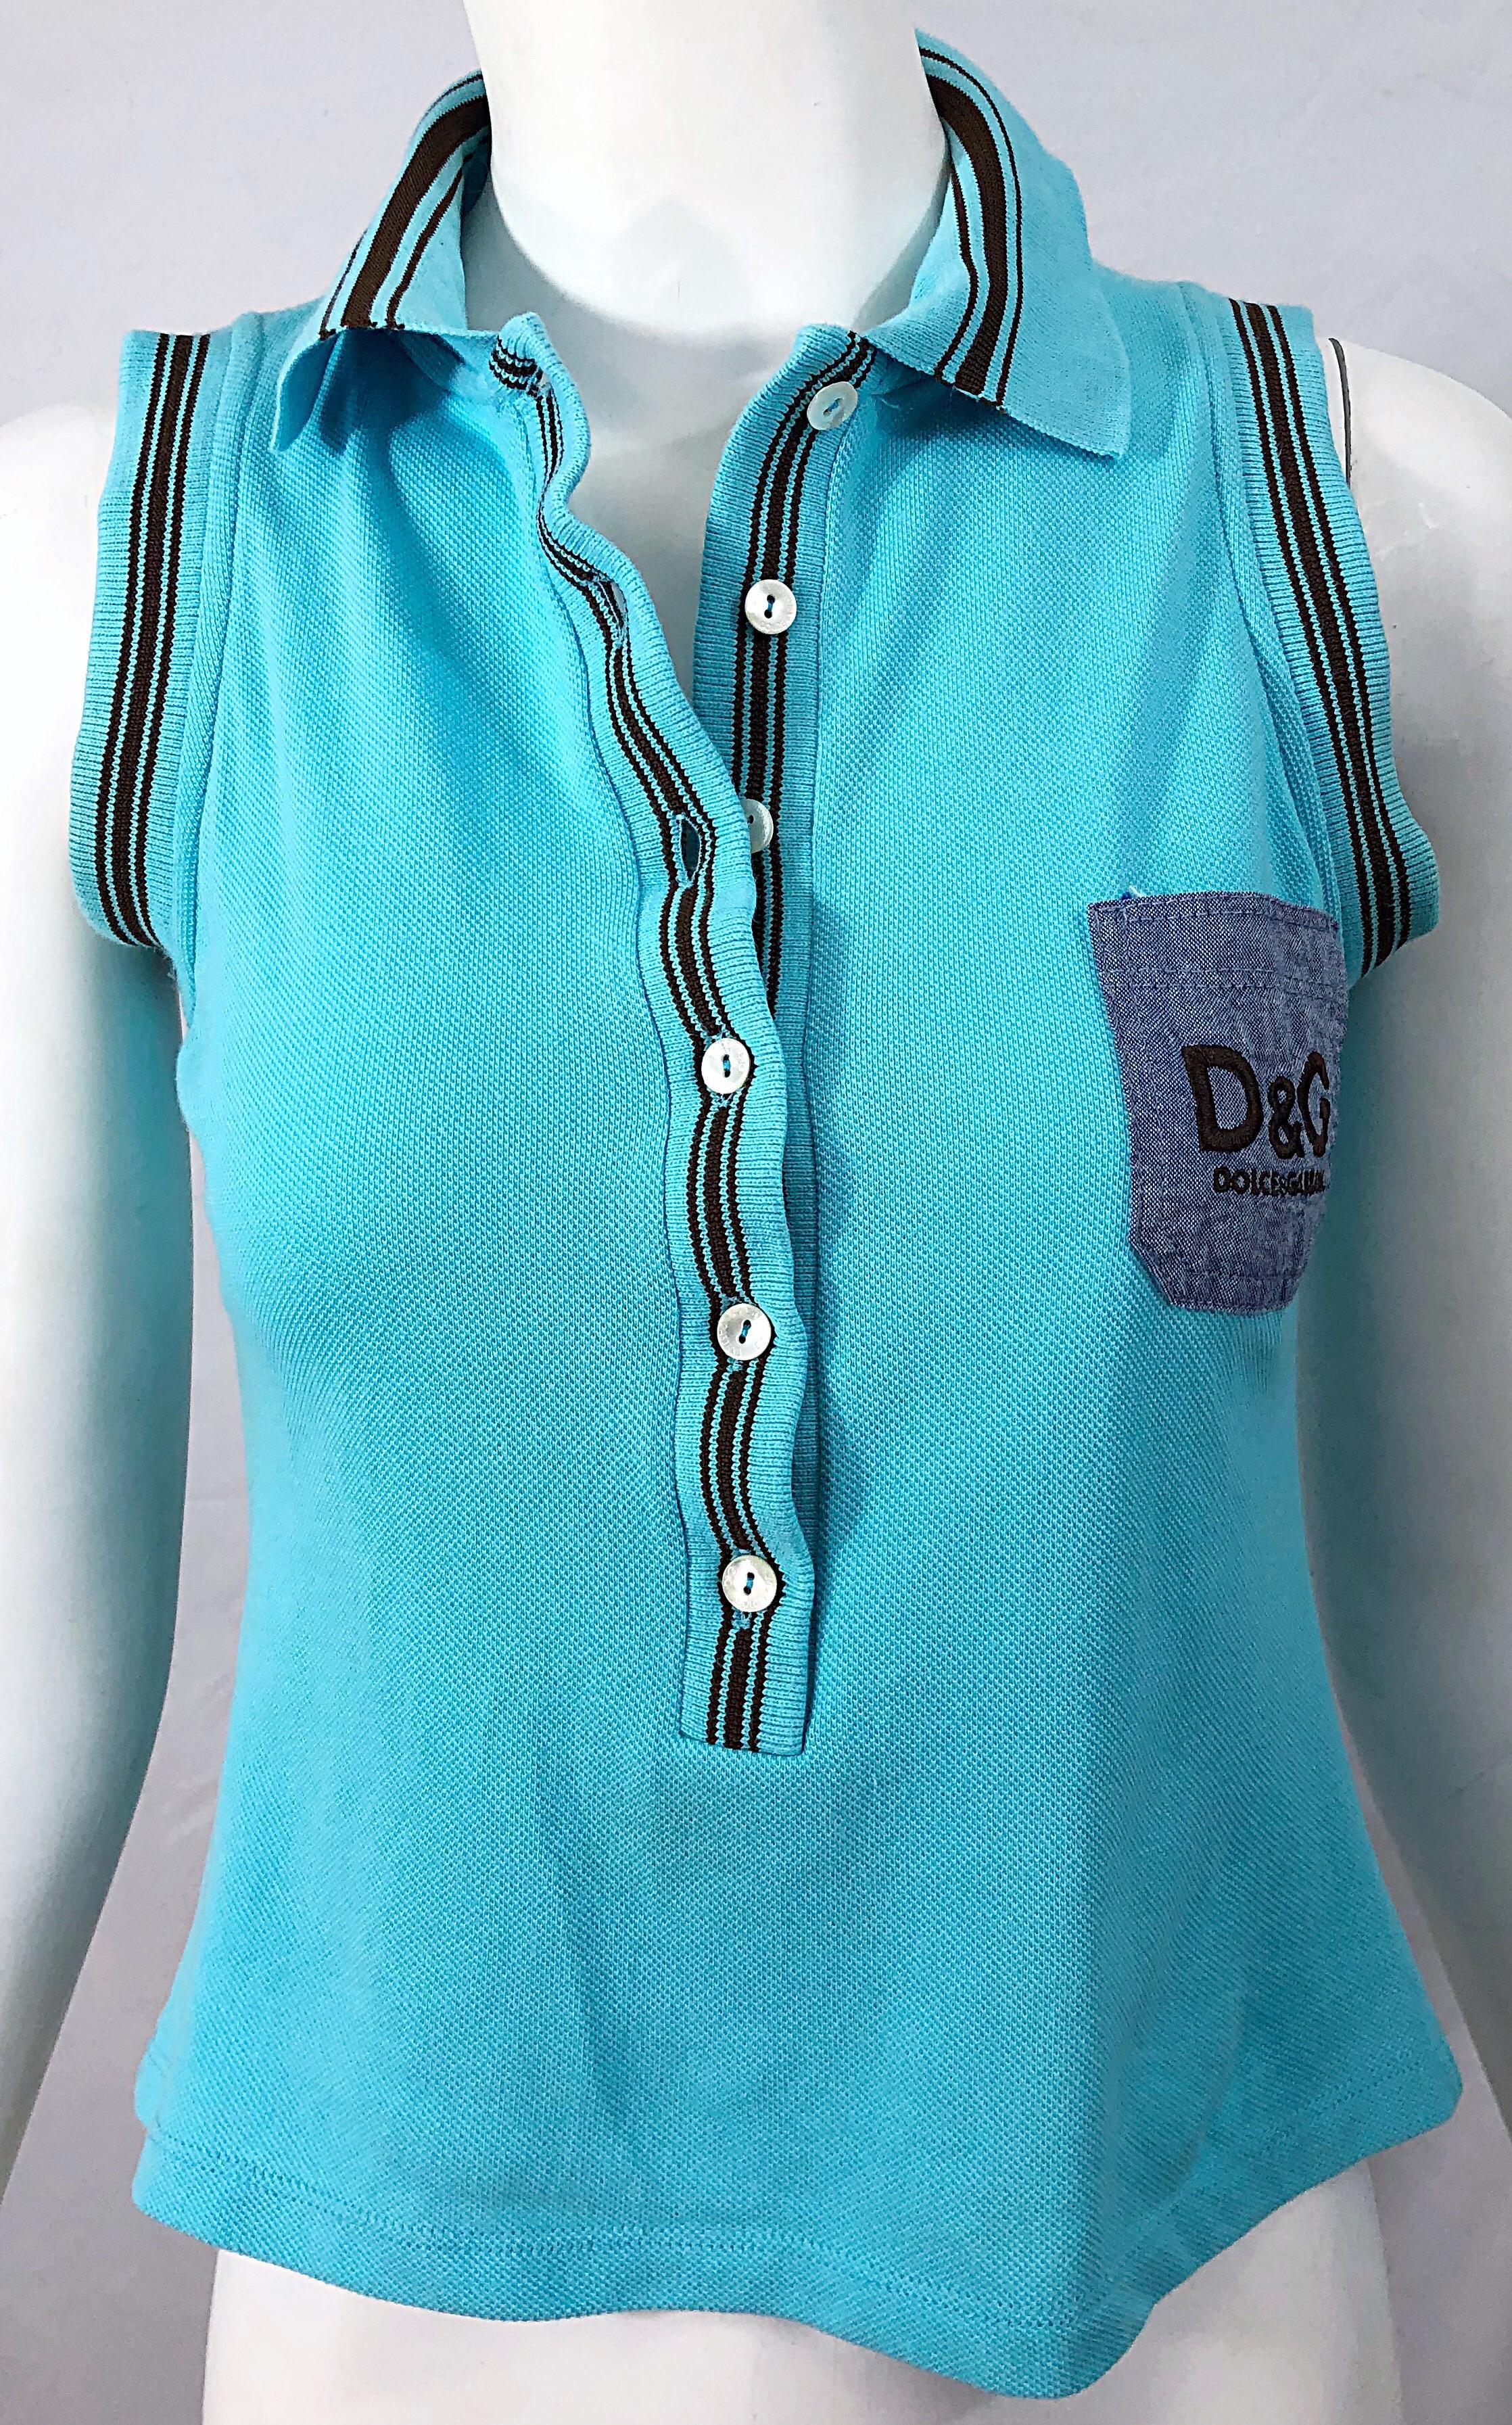 Vintage Dolce & Gabbana 1990s Turquoise Blue + Brown Logo 90s Knit Crop Top Polo For Sale 2